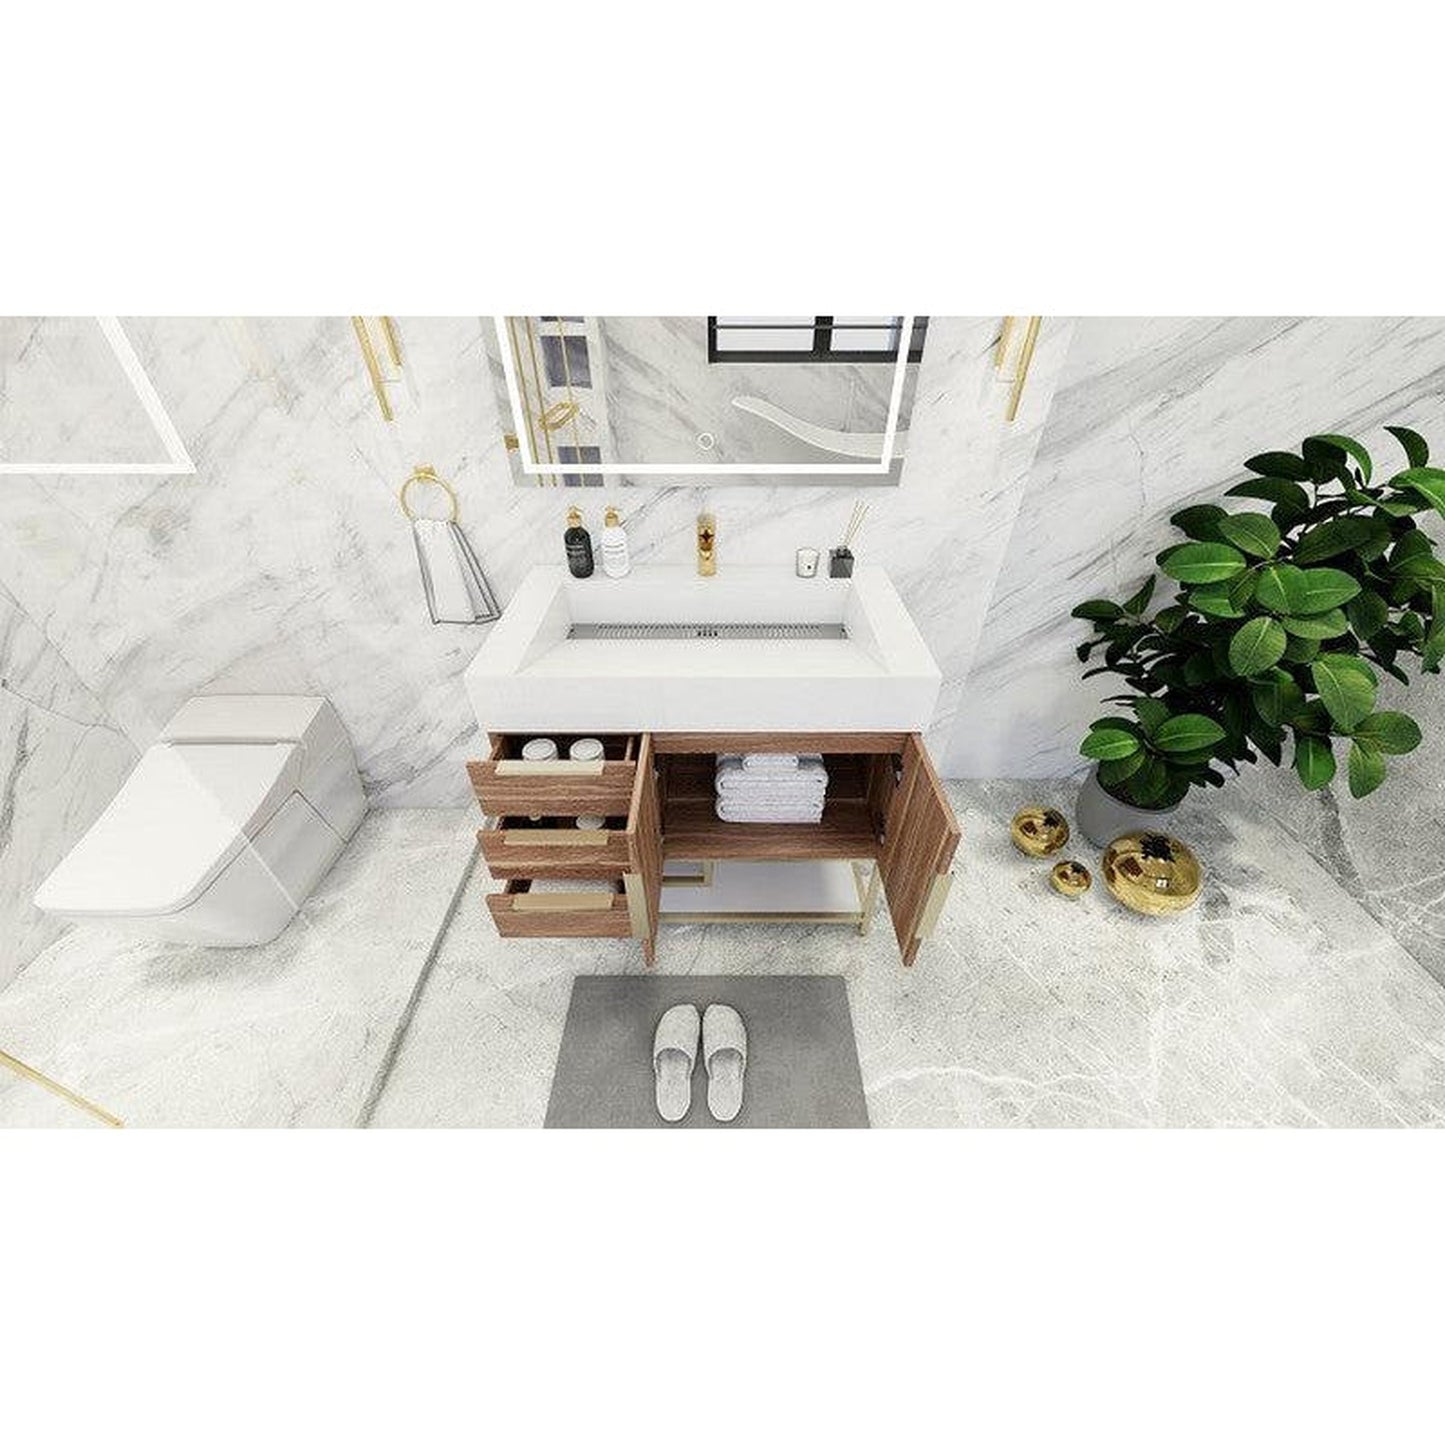 Moreno Bath Bethany 36" White Oak Freestanding Vanity With Left Side Drawers and Single Reinforced White Acrylic Sink